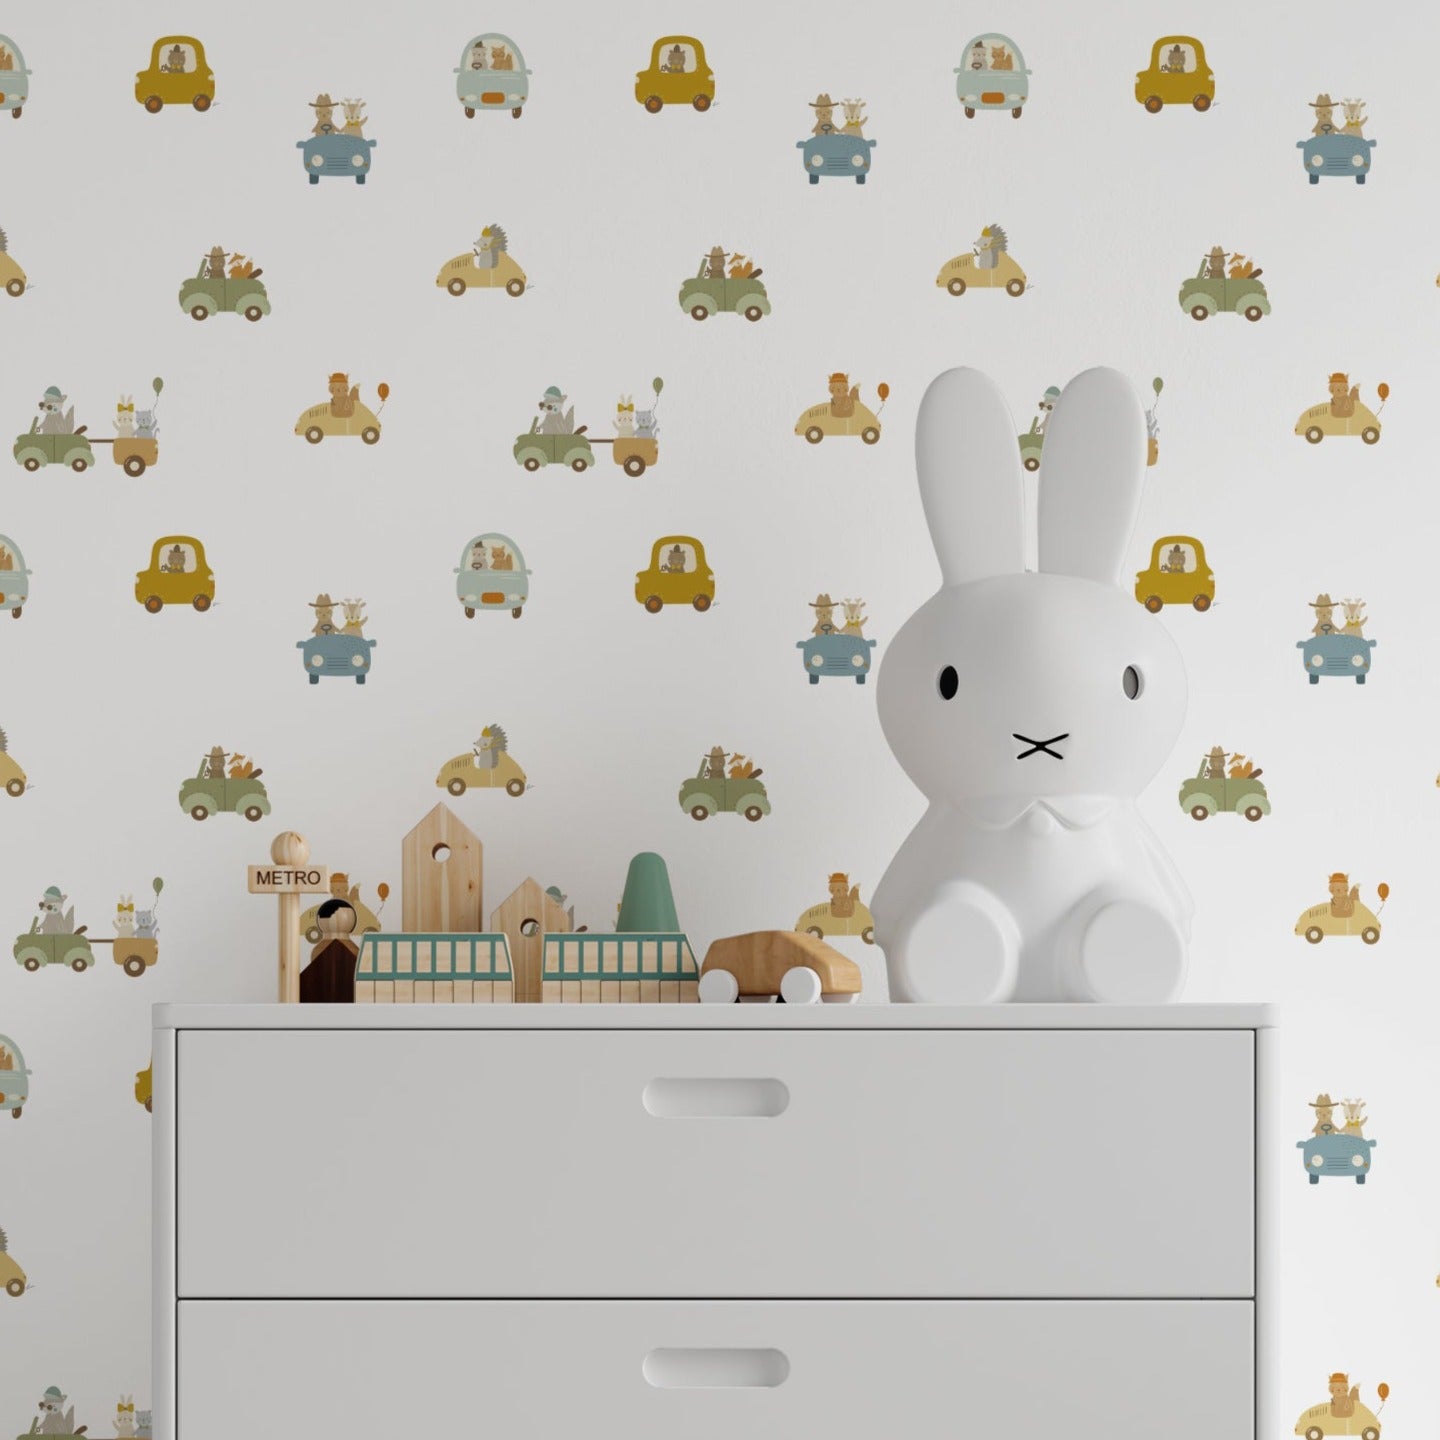 A modern child's room decorated with Road Trip Wallpaper, which displays a fun and colorful scene of animals on a road adventure, including a bunny in a white toy car on a chest of drawers, enhancing the room's playful and adventurous theme